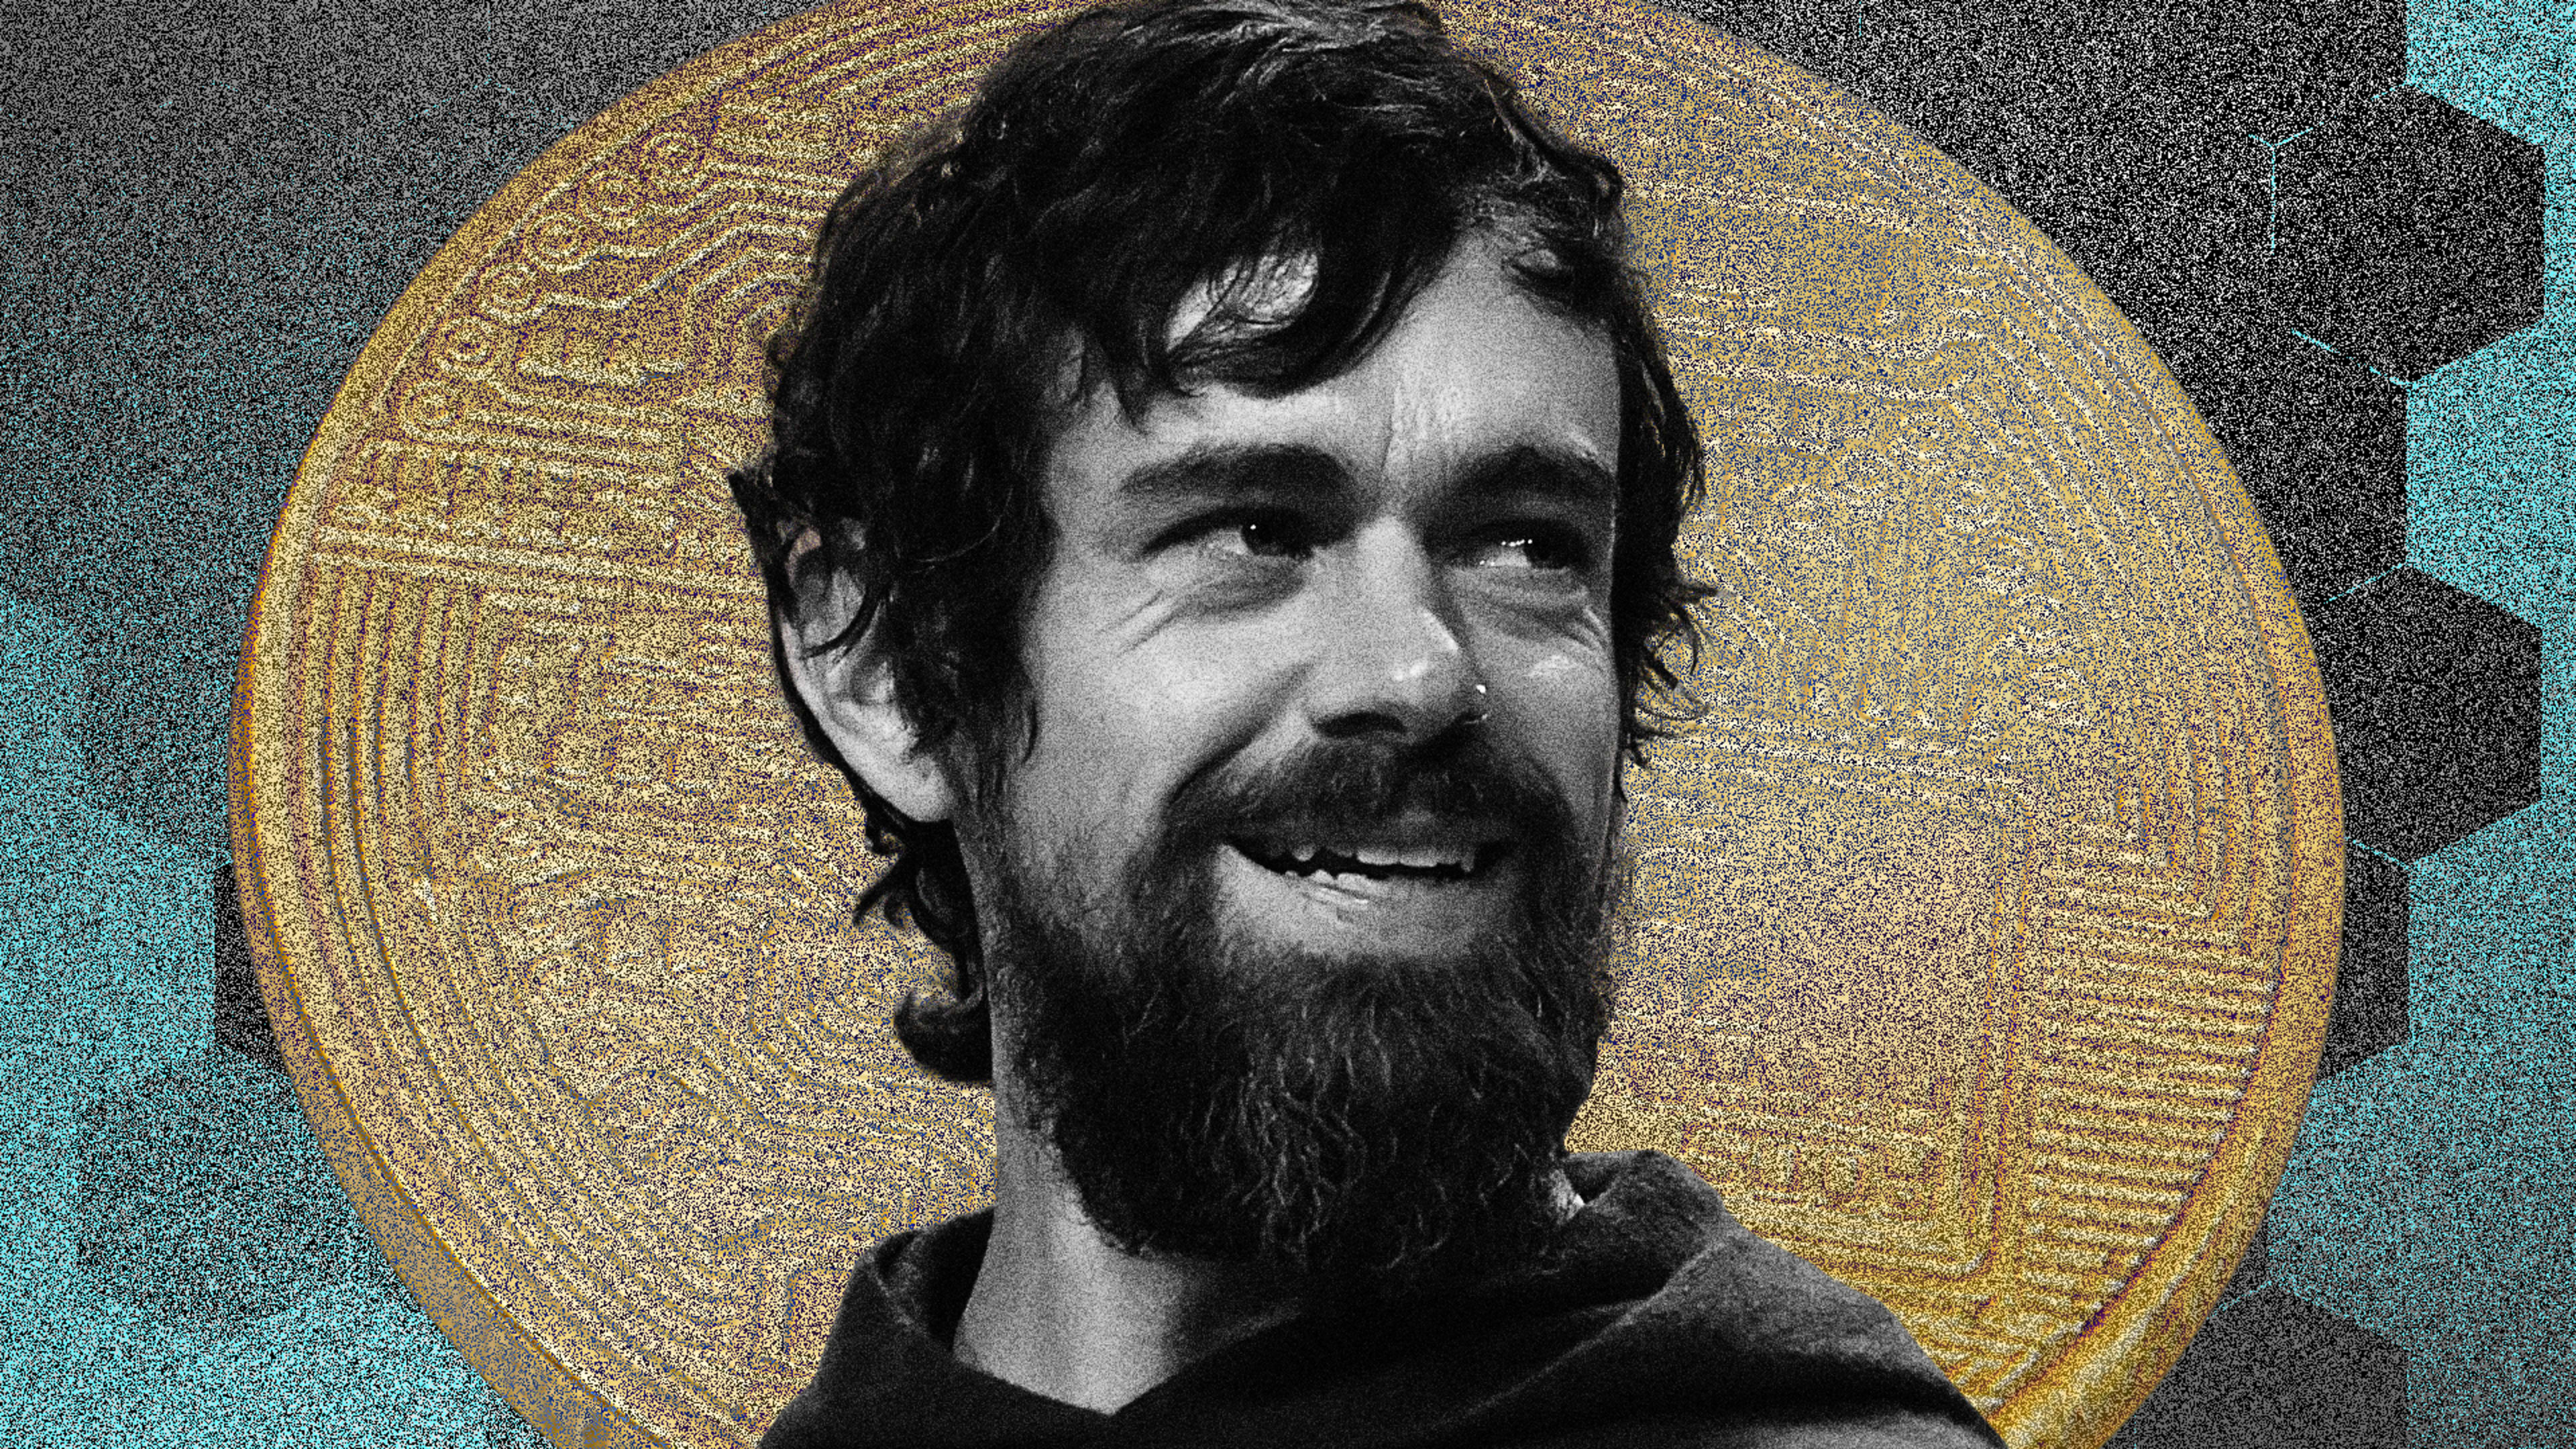 Jack Dorsey sells an NFT of his first tweet for $2.9 million, says the money will go to charity